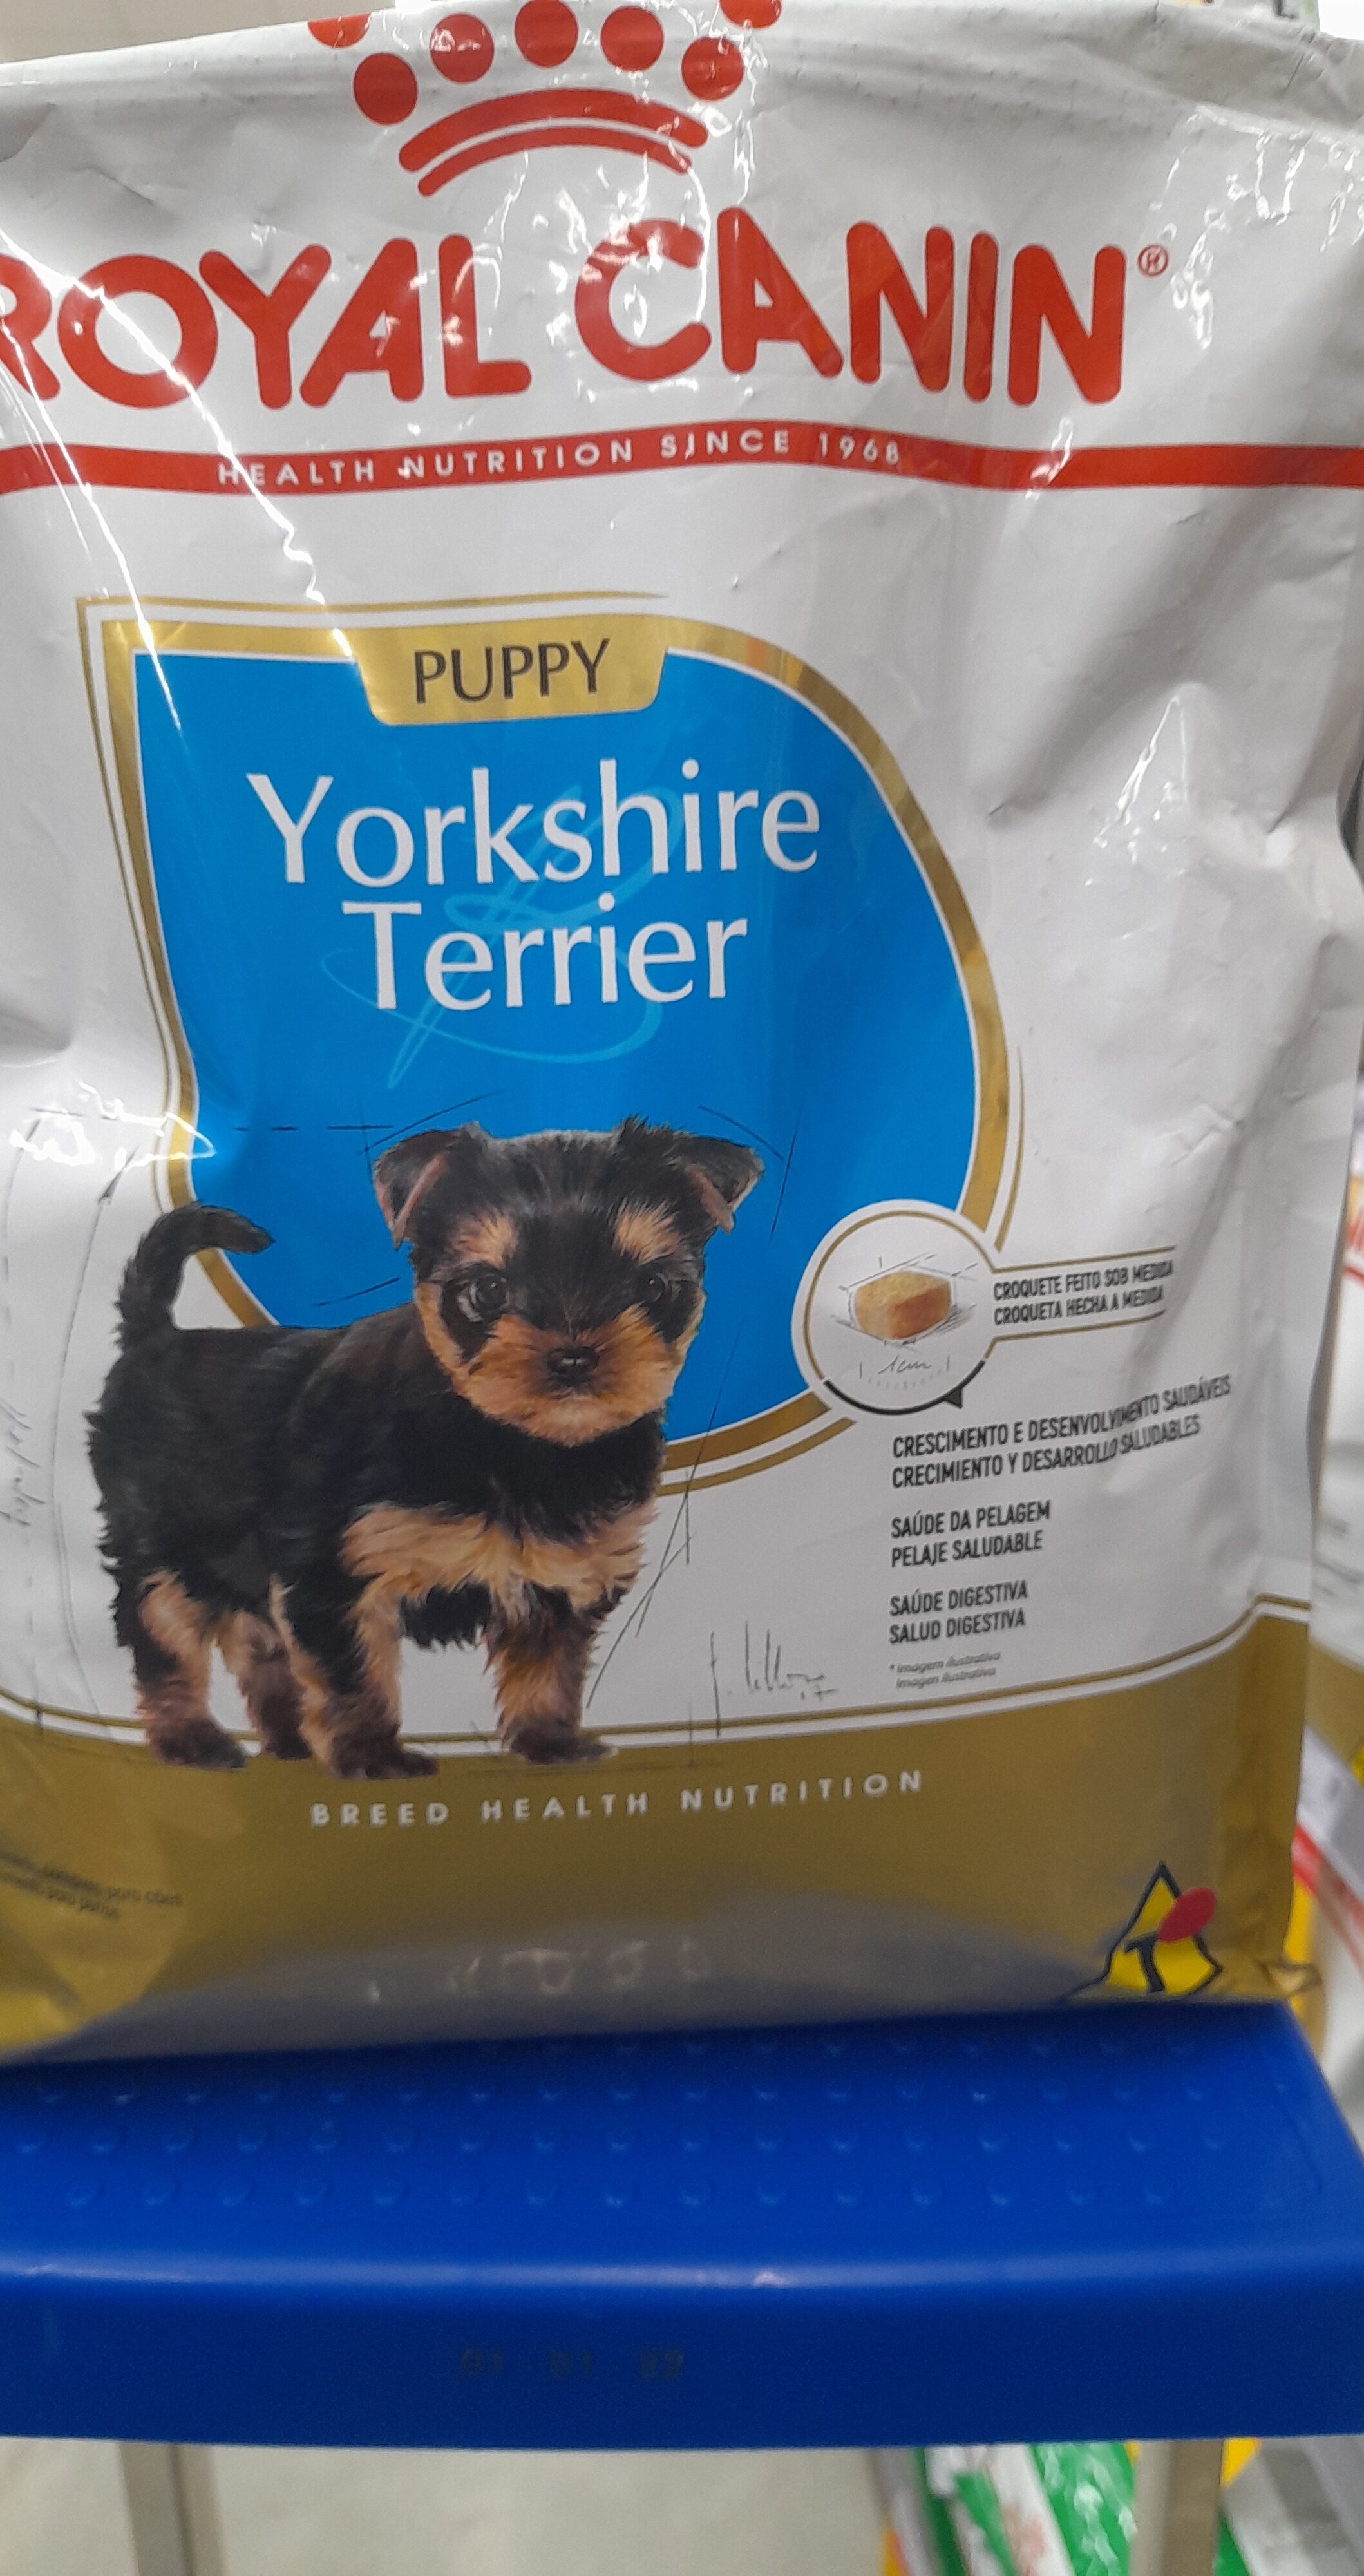 Royal puppy york - Product - pt